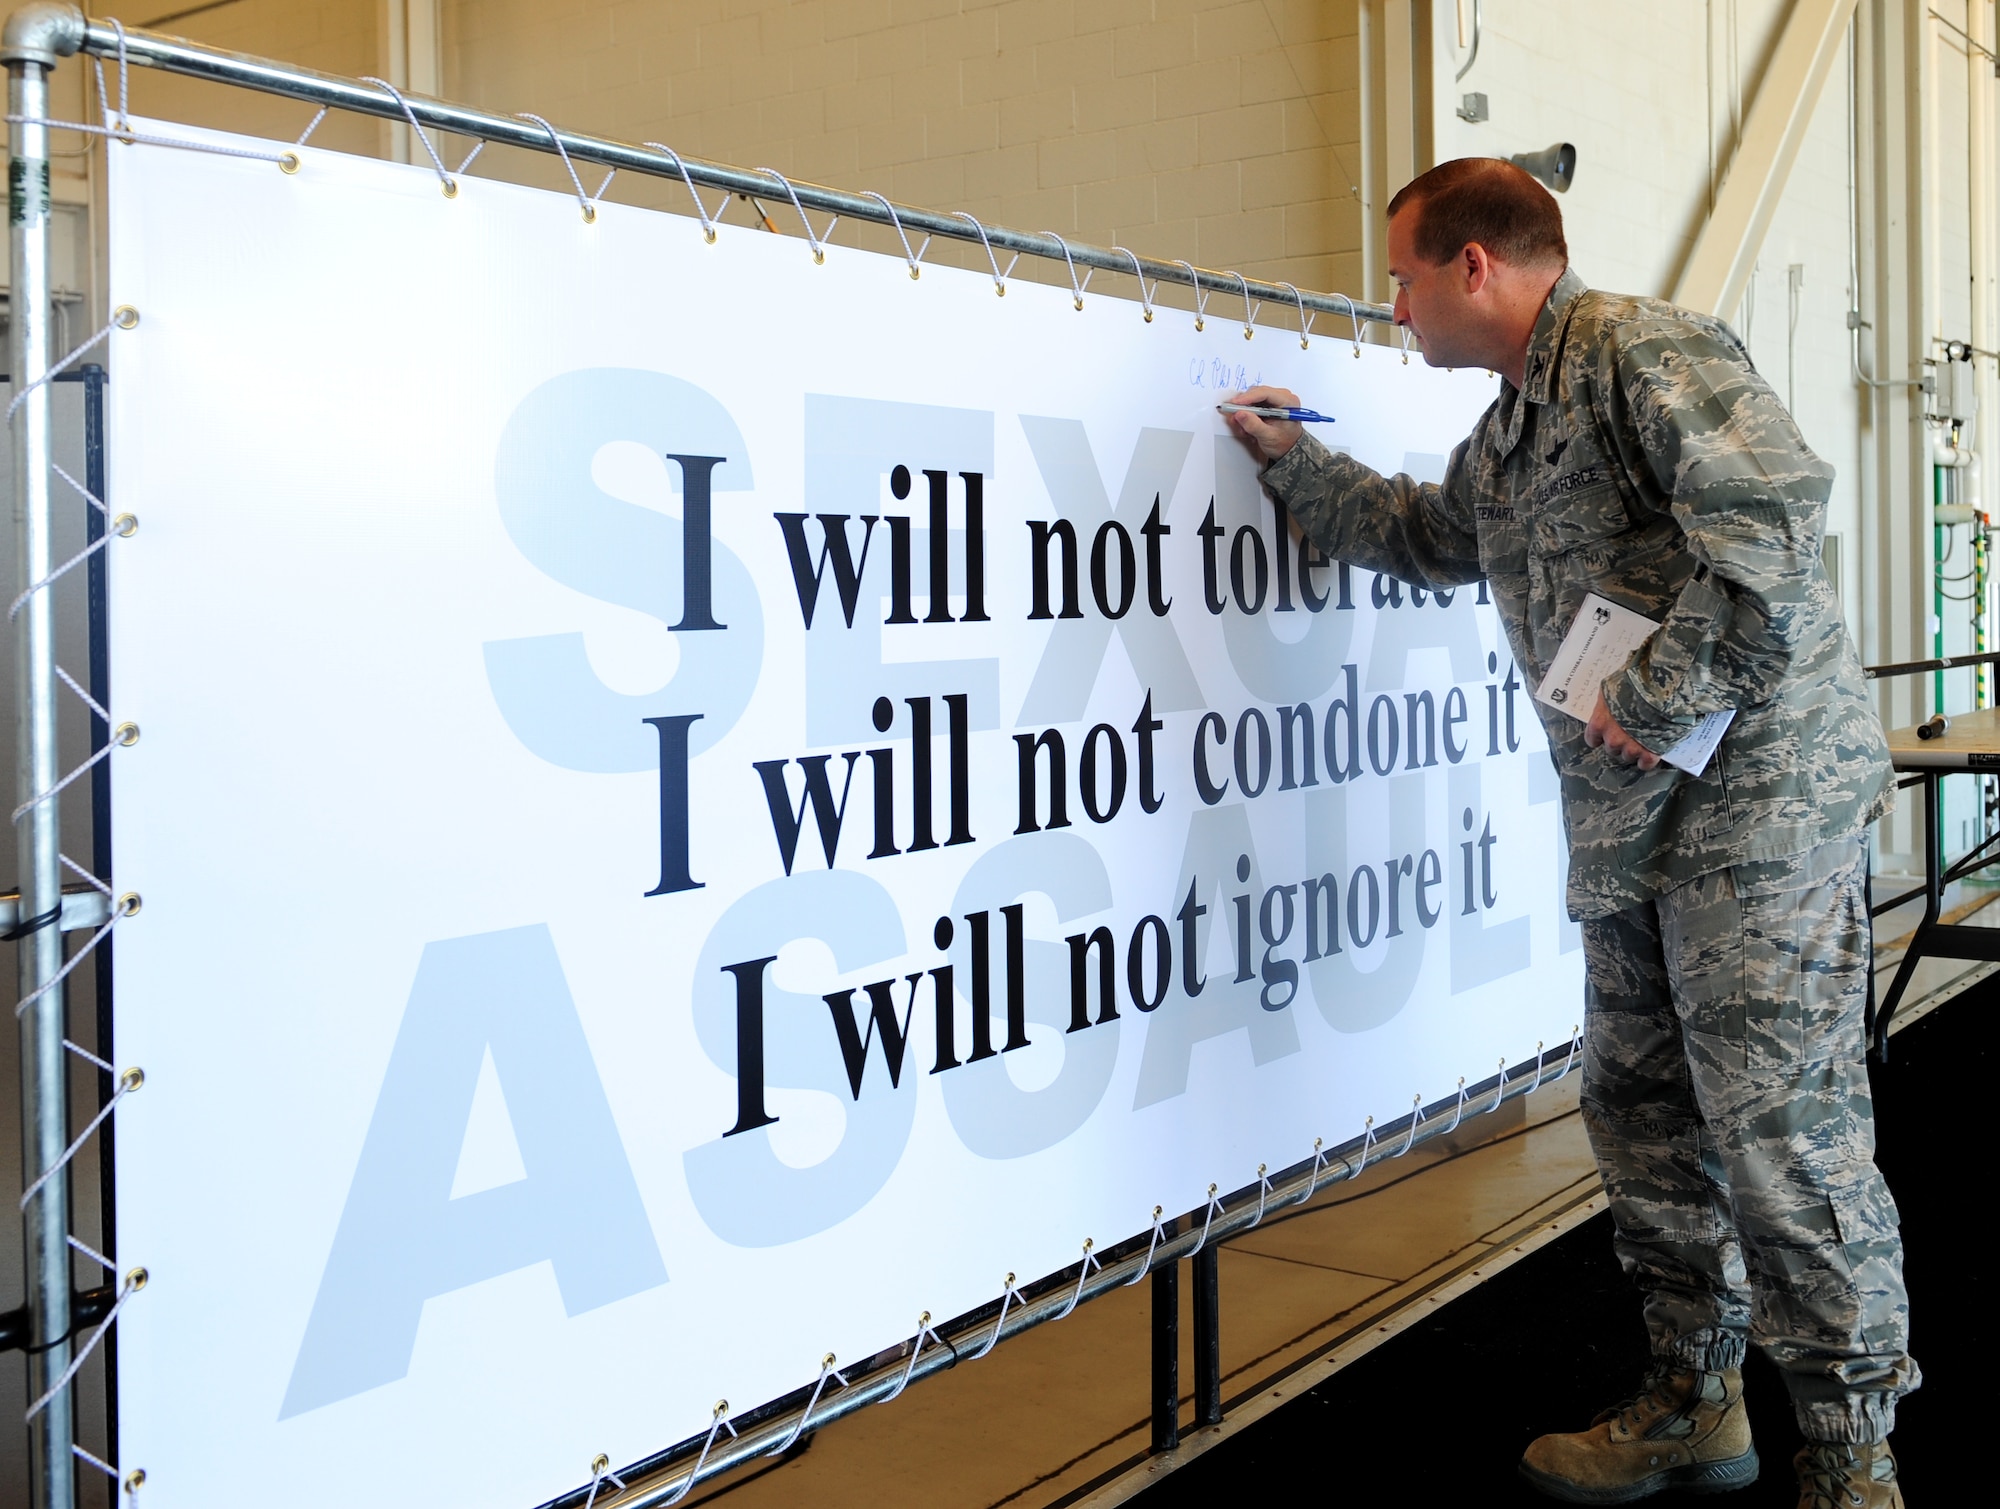 Col. Phil Stewart, 9th Reconnaissance Wing commander, signs a banner pledging to stop sexual assault during a sexual assault prevention and response brief at Beale Air Force Base, Calif., June 26, 2013. All of Team Beale was given the opportunity to sign the pledge. (U.S. Air Force photo by Airman 1st Class Bobby Cummings/Released)